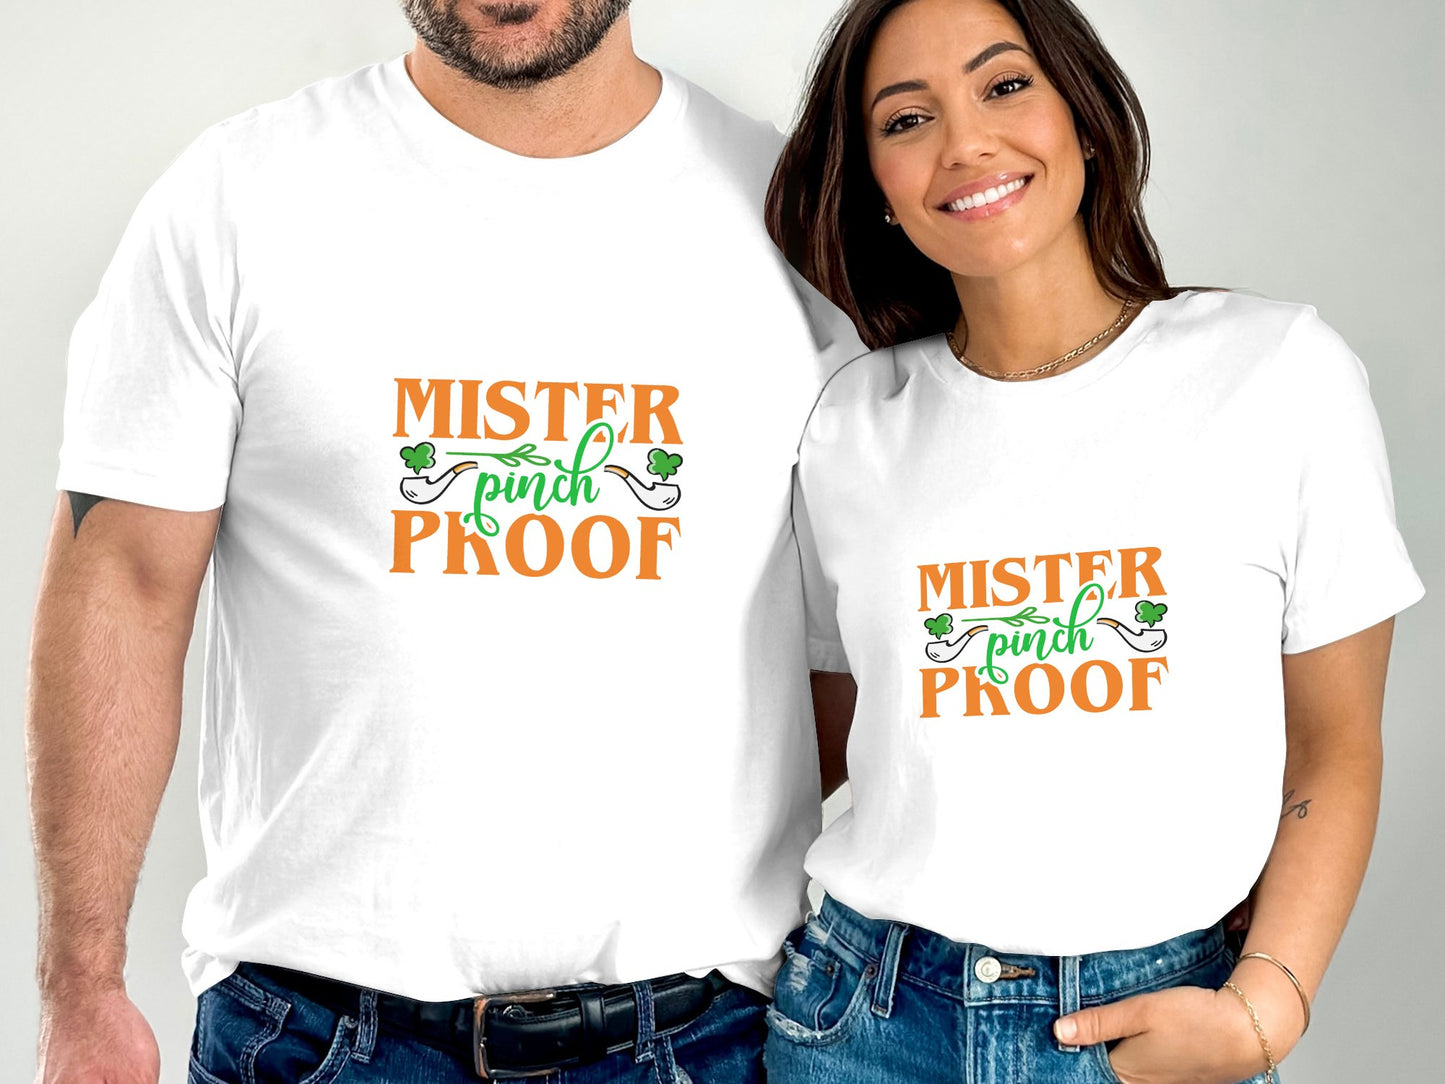 Mister Pinch Proof (St. Patrick's Day T-shirt)